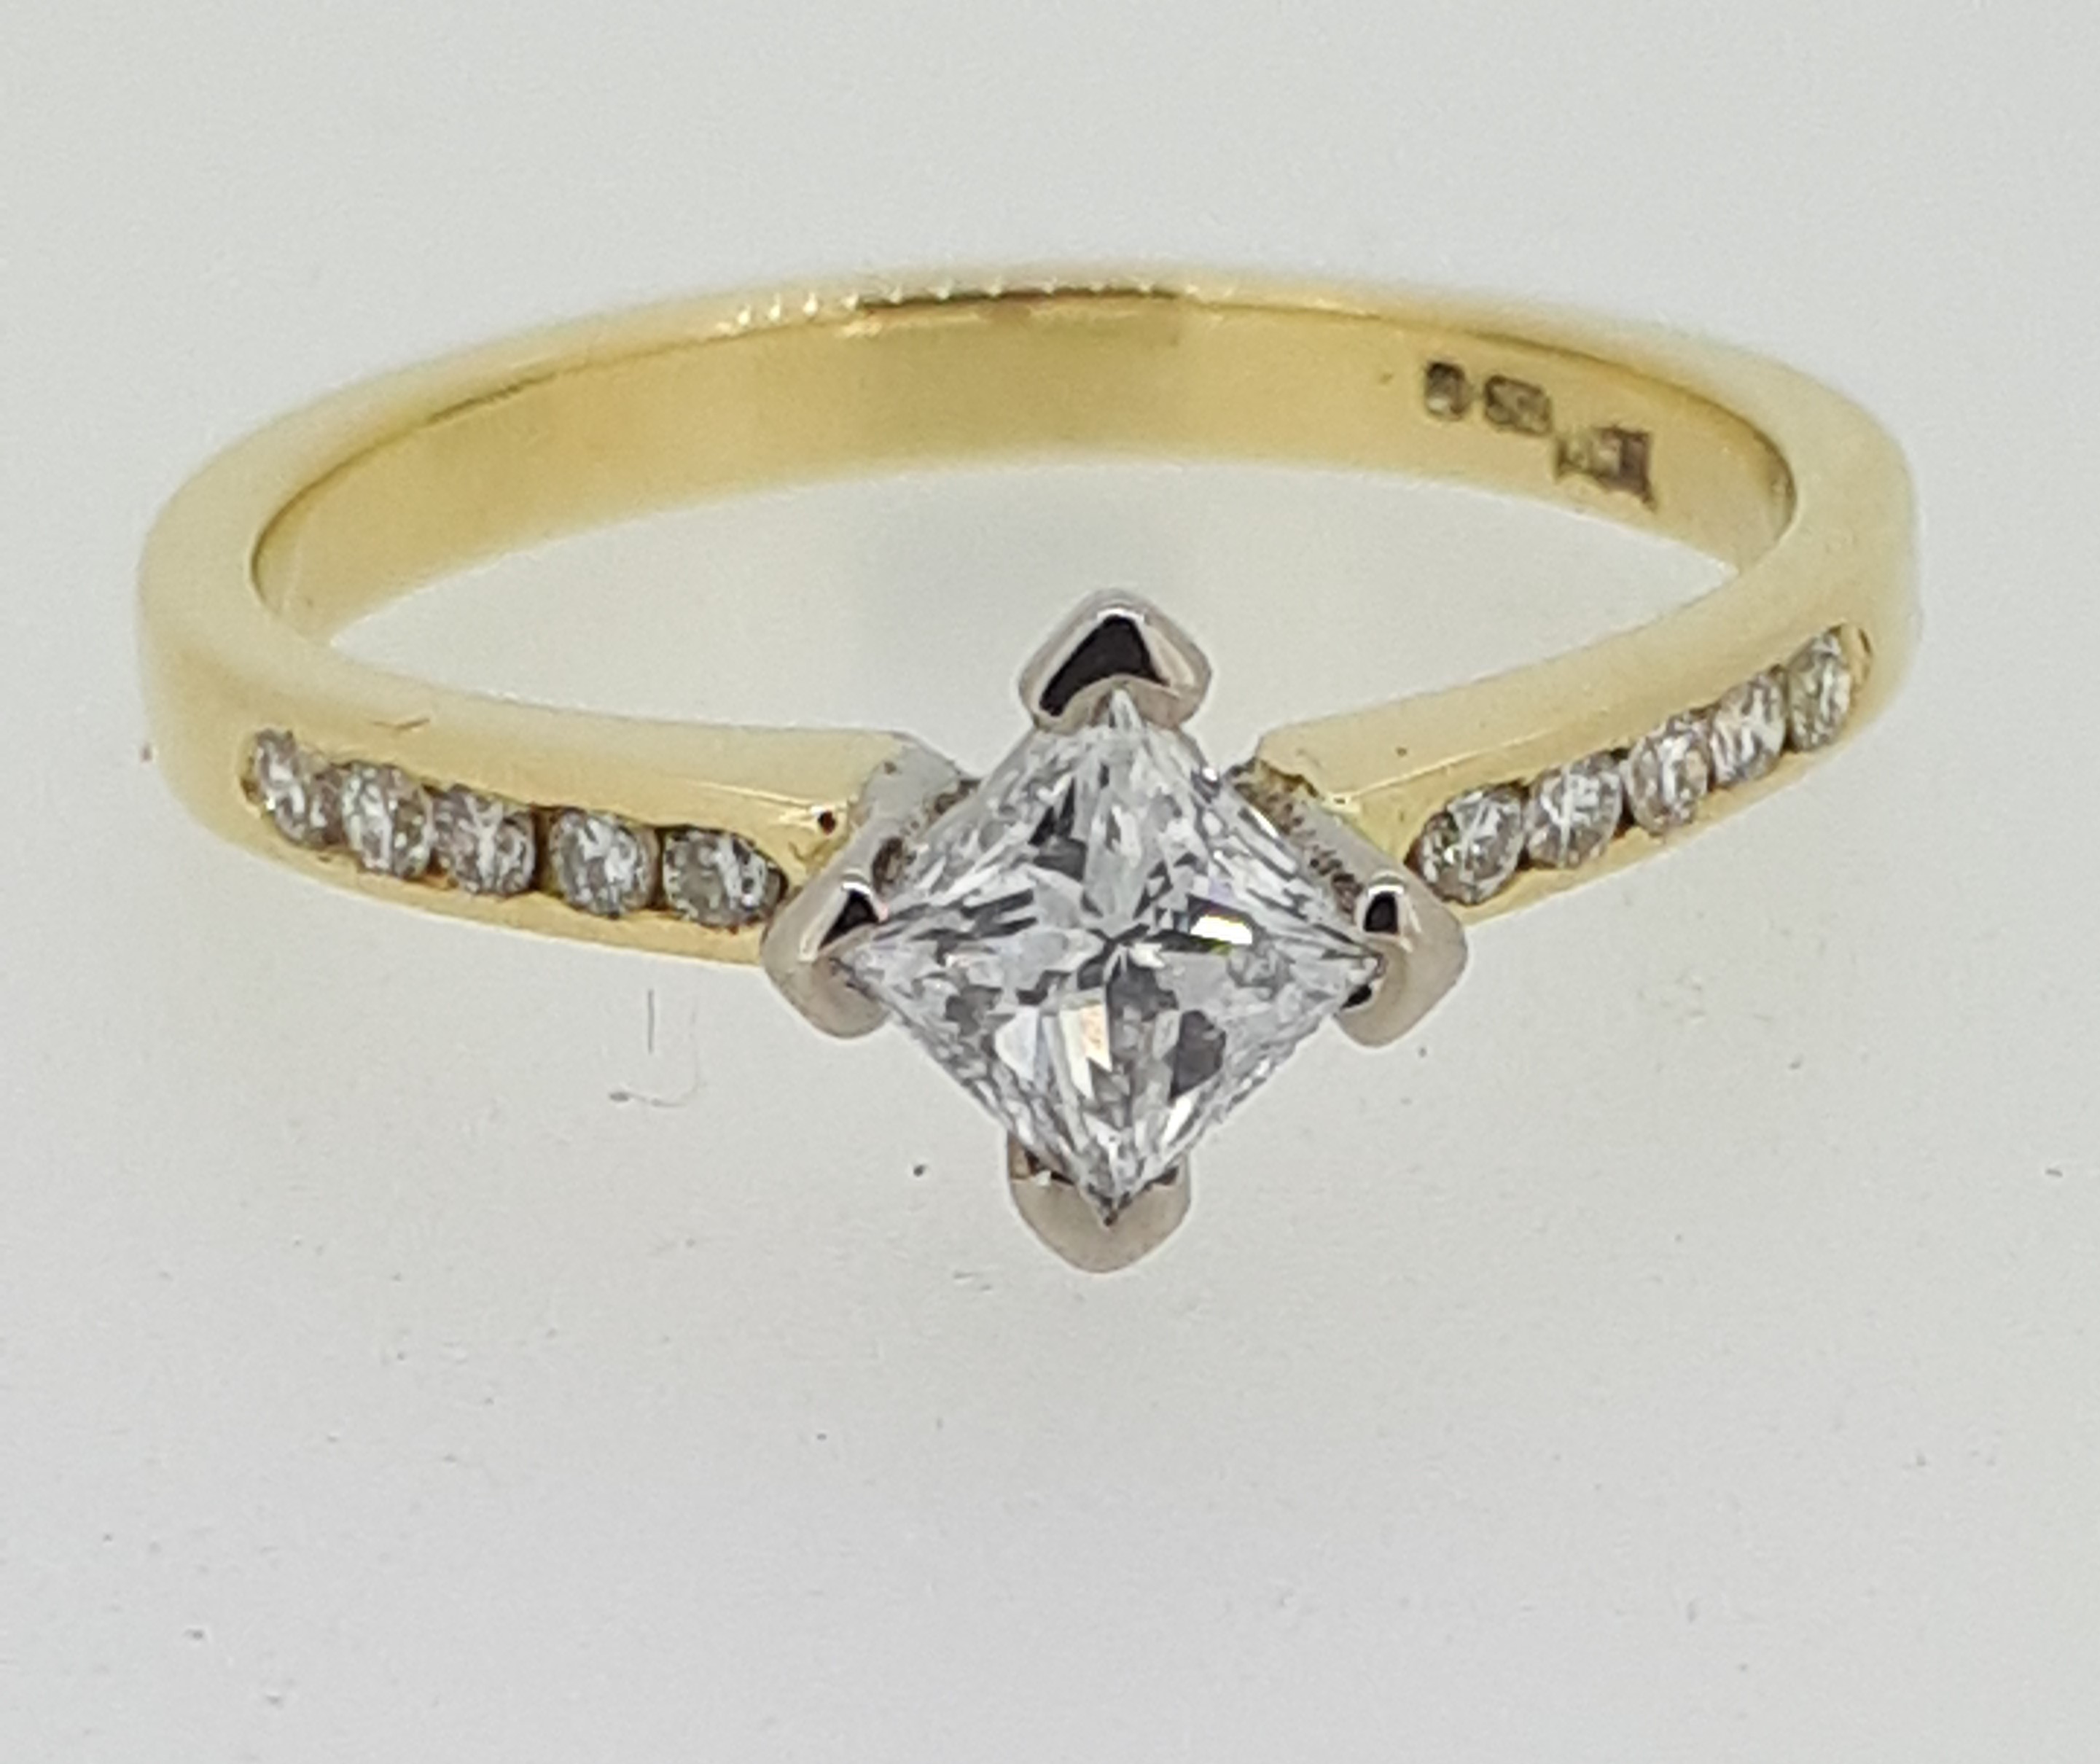 18ct (750) Yellow Gold Princess Cut 0.5ct Diamond Ring with Diamond Shoulders - Image 10 of 10